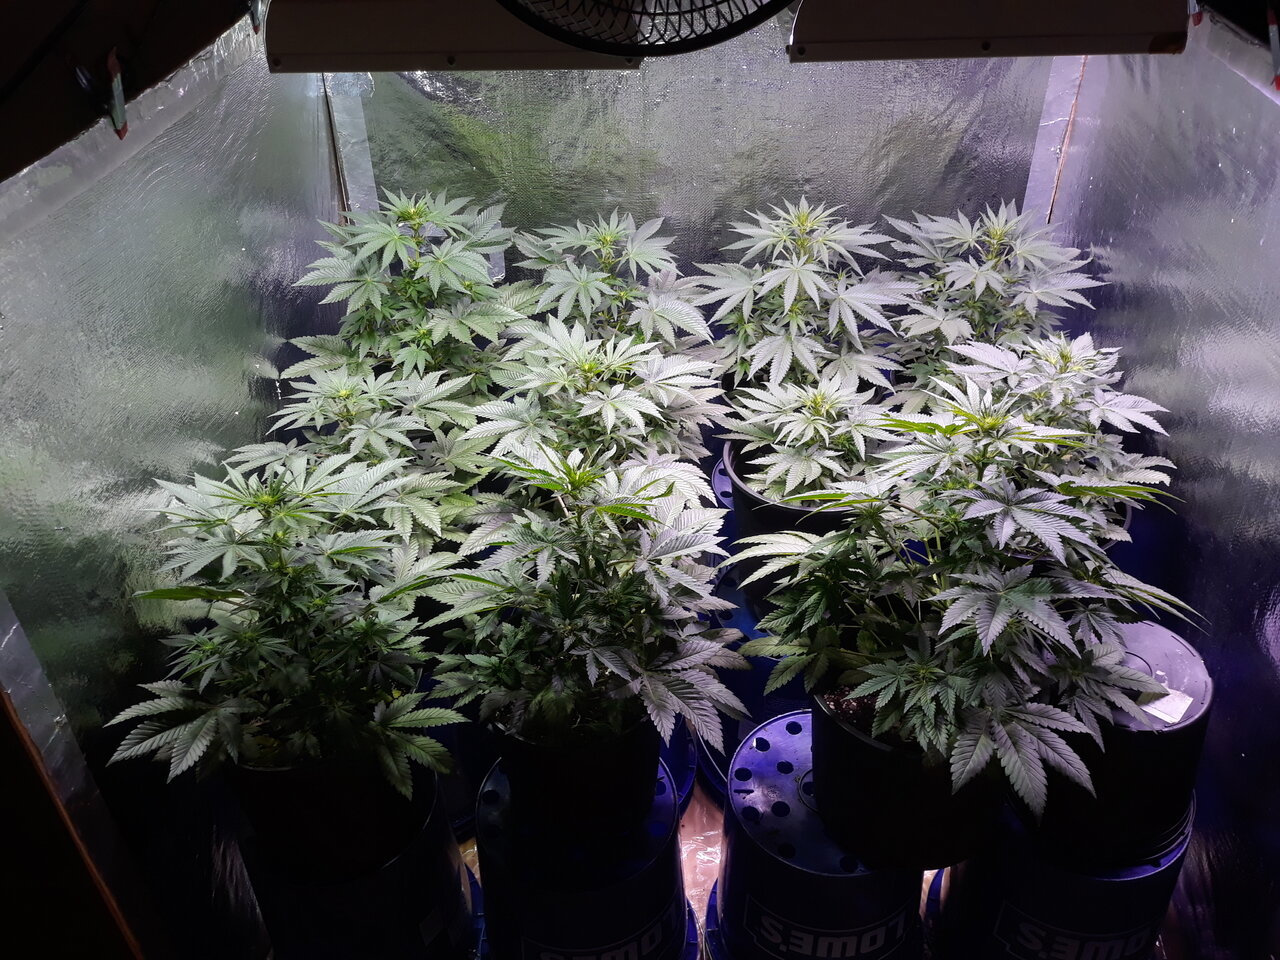 Day 16 of the flip switch to hps time.